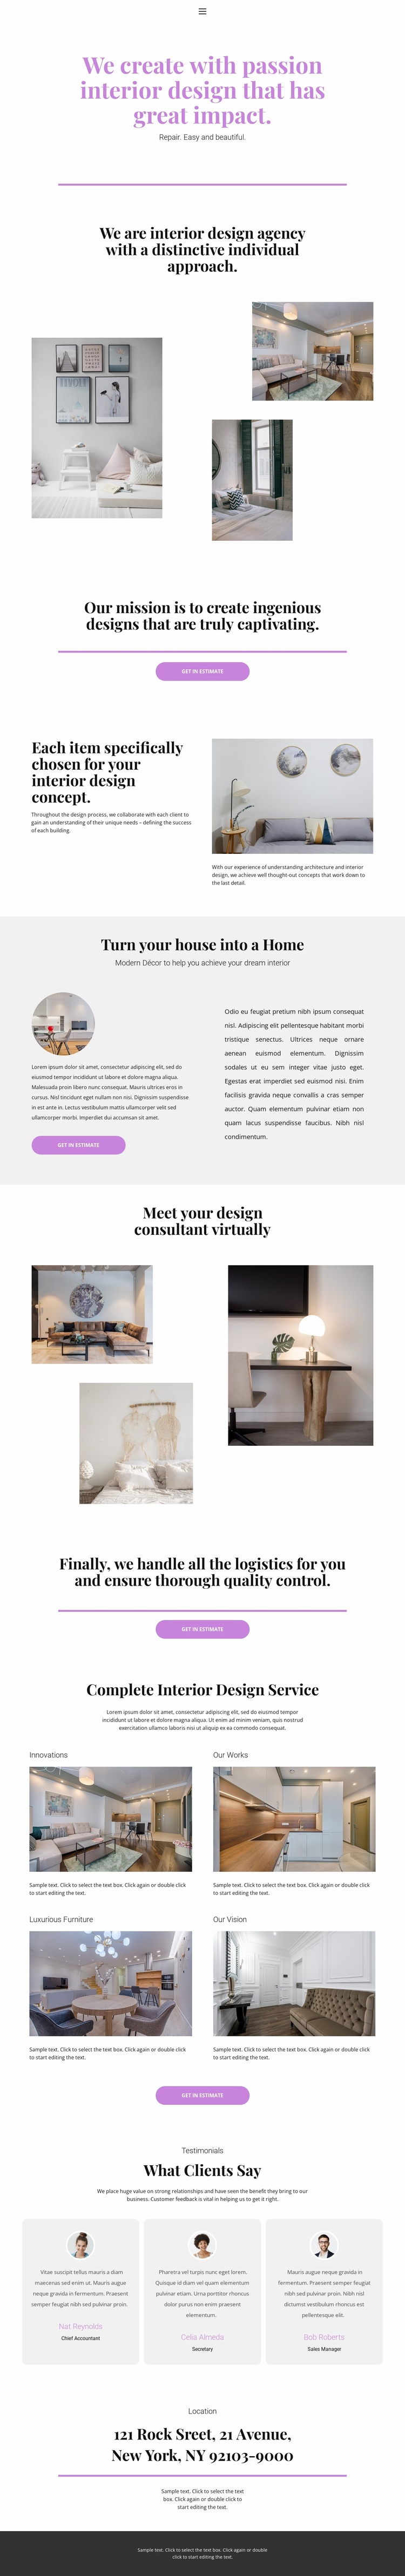 Choice of design for the house Landing Page